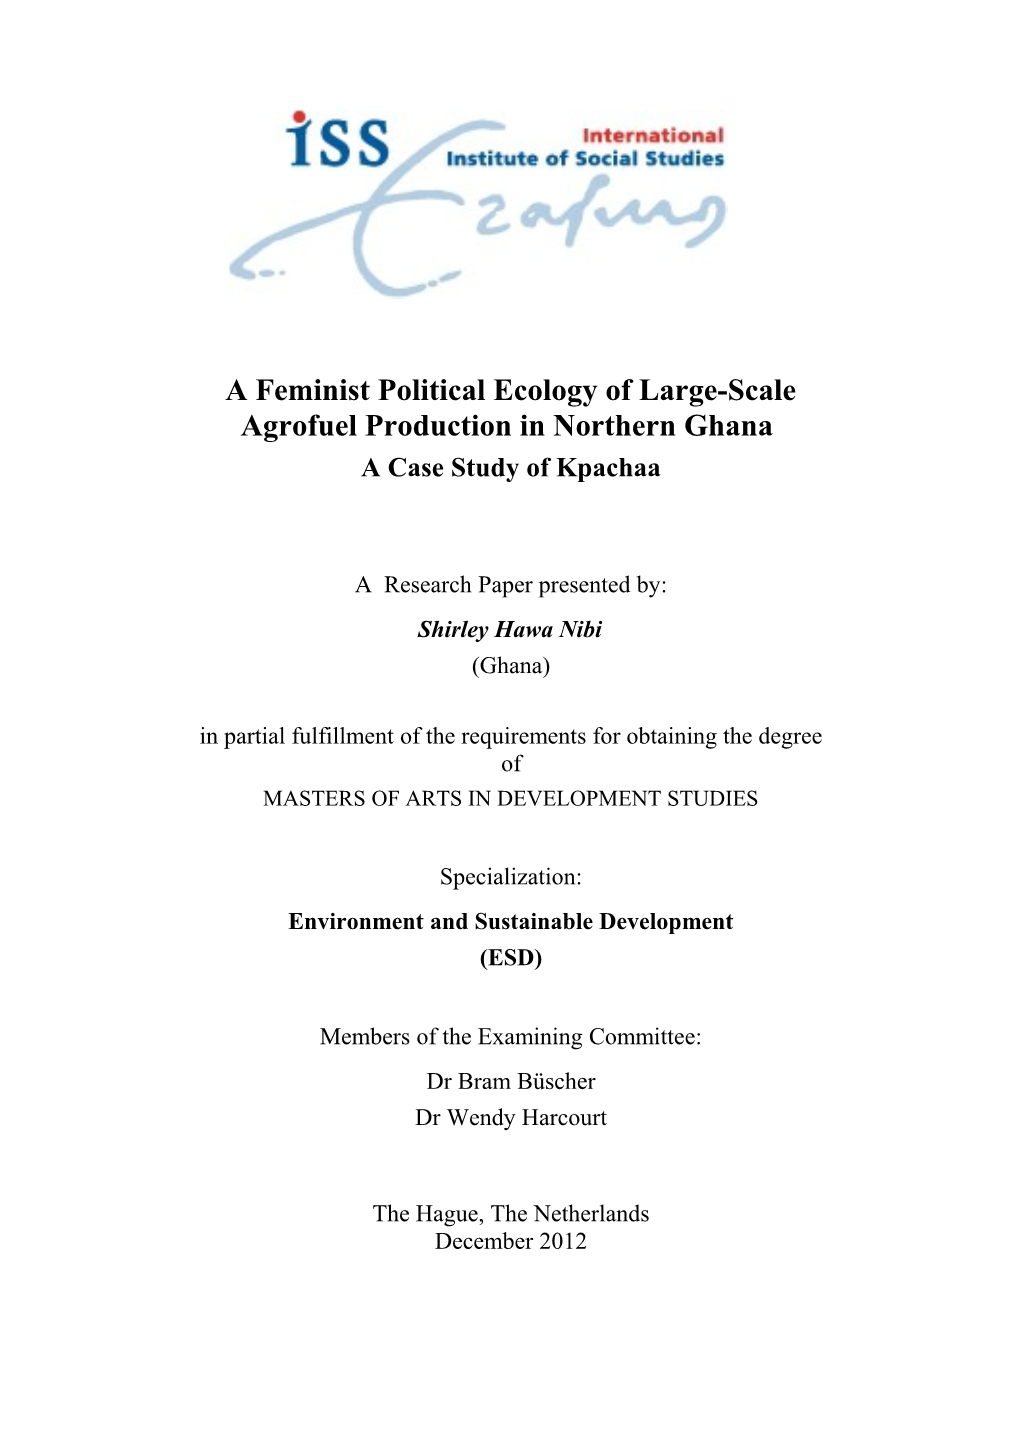 A Feminist Political Ecology of Large-Scale Agrofuel Production in Northern Ghana